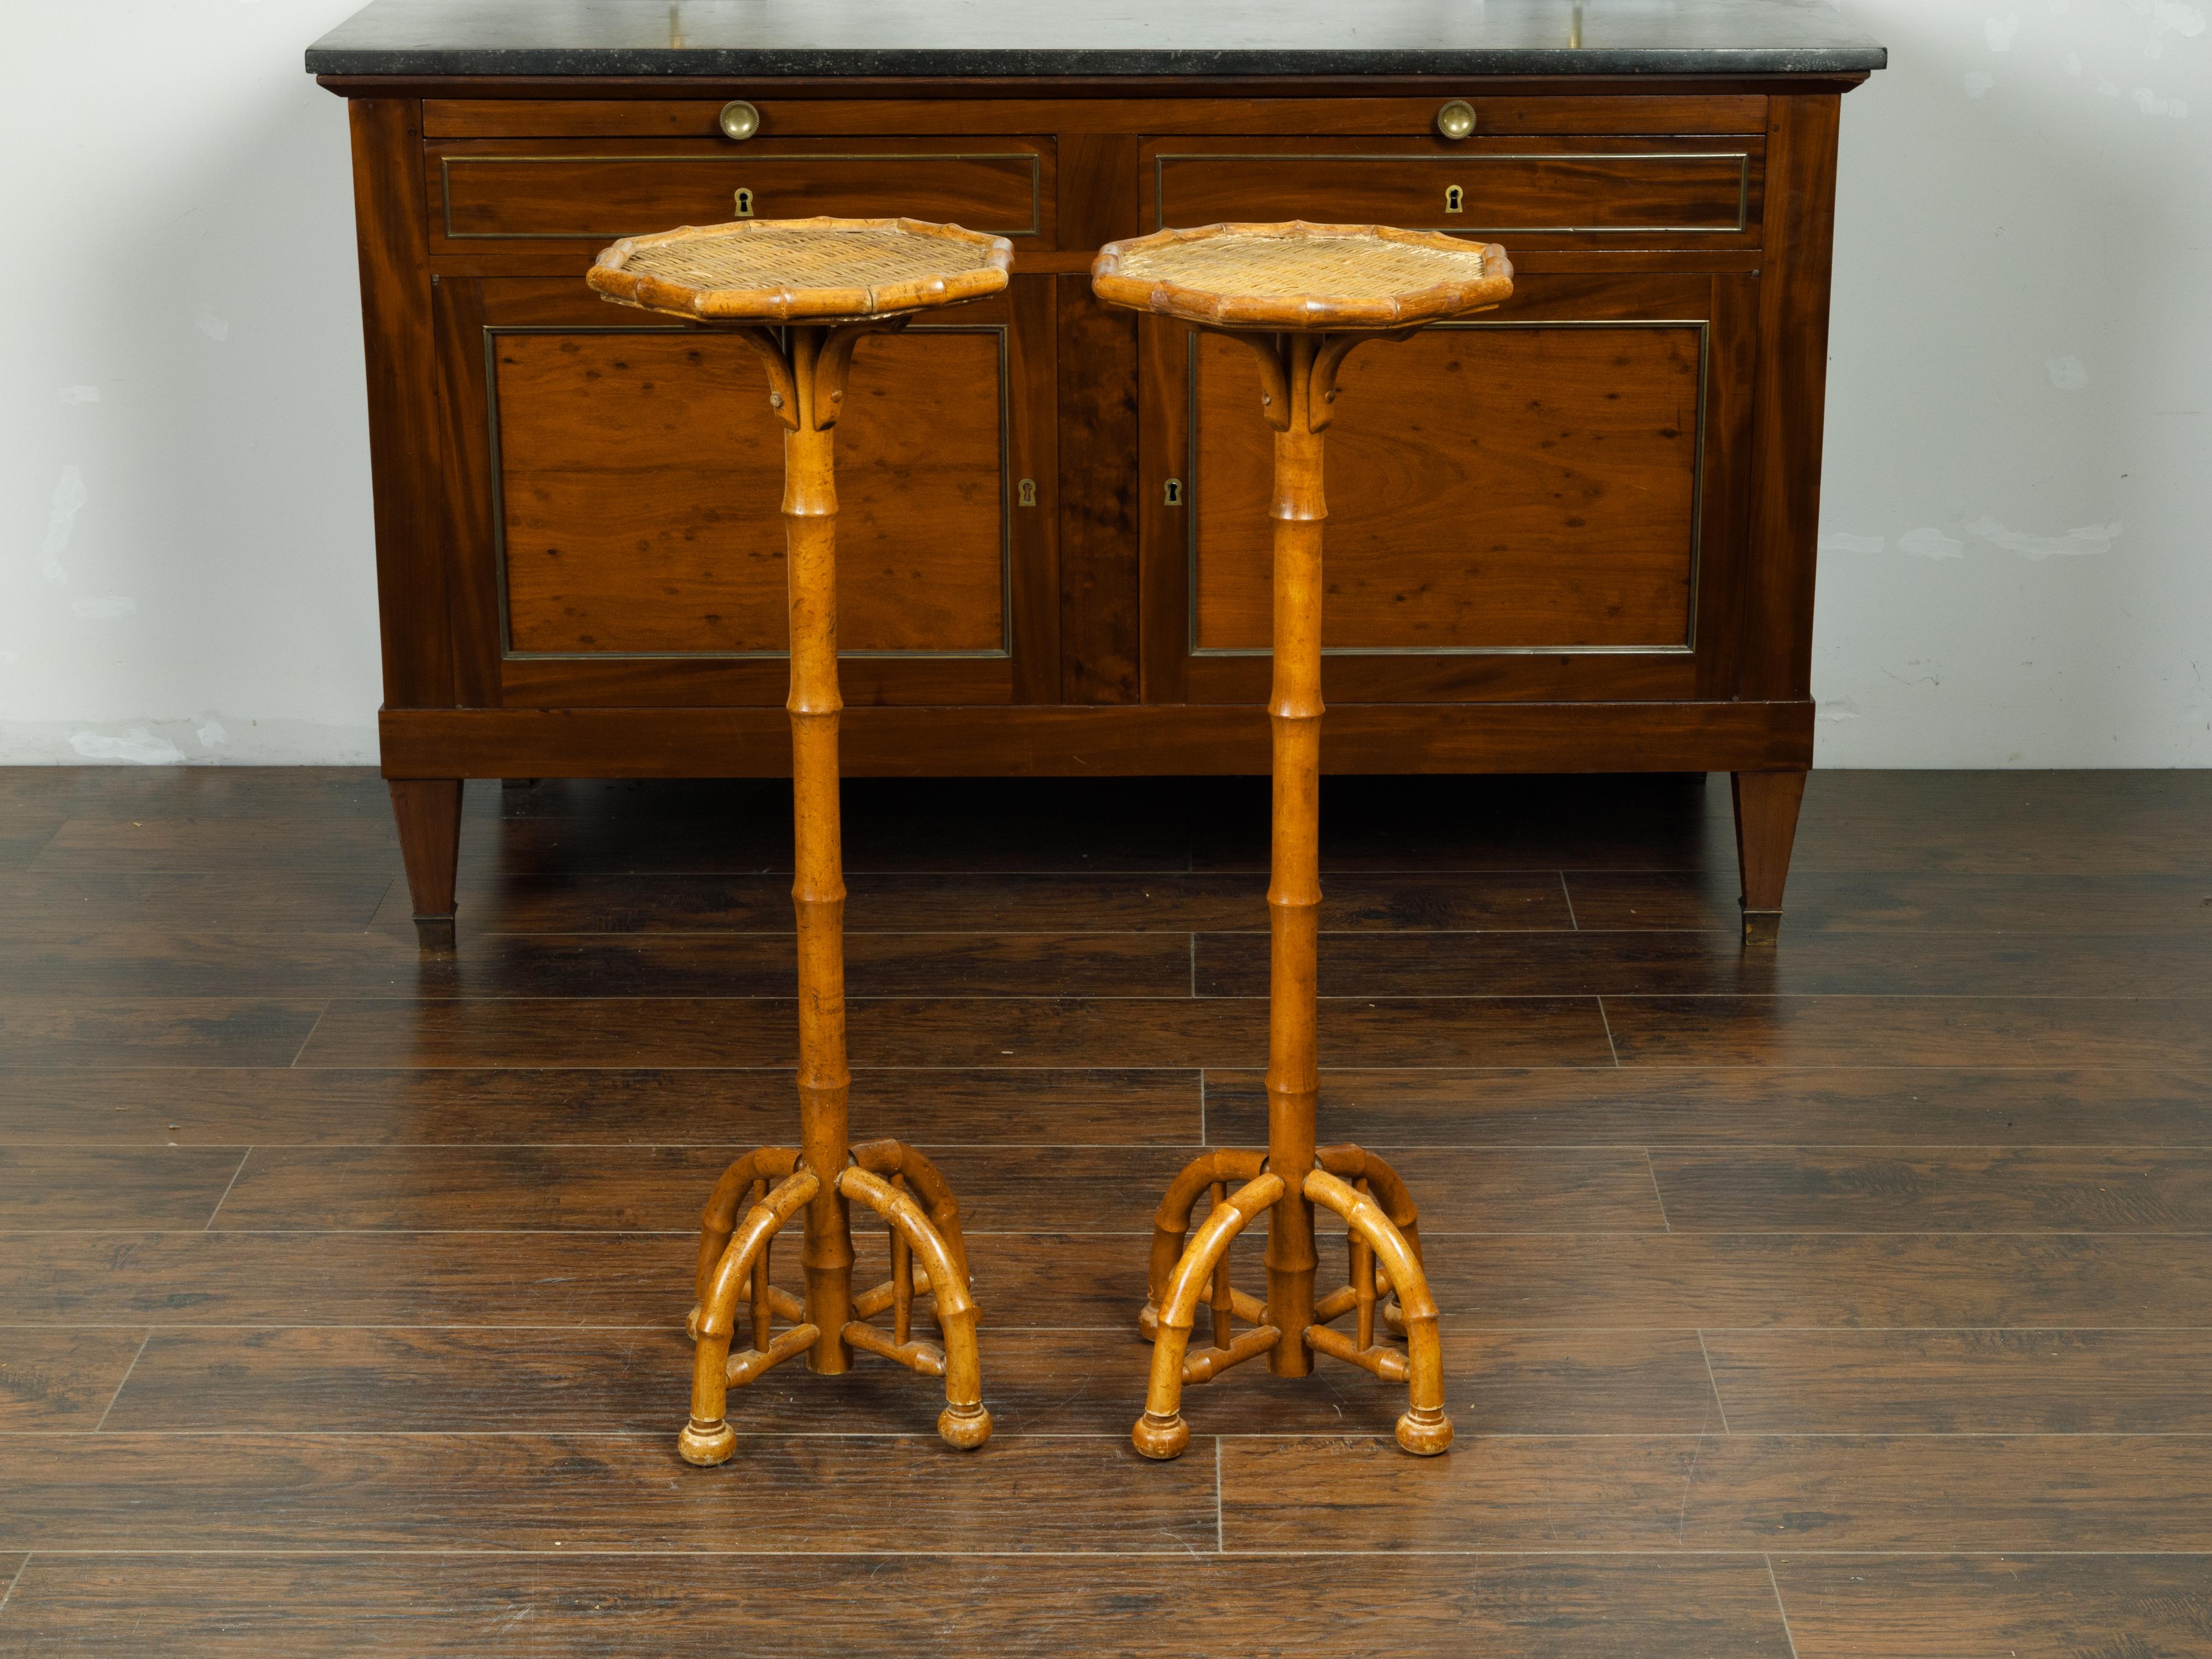 20th Century Pair of 1920s Faux Bamboo Stands with Octagonal Rattan Tops and Quadripod Bases